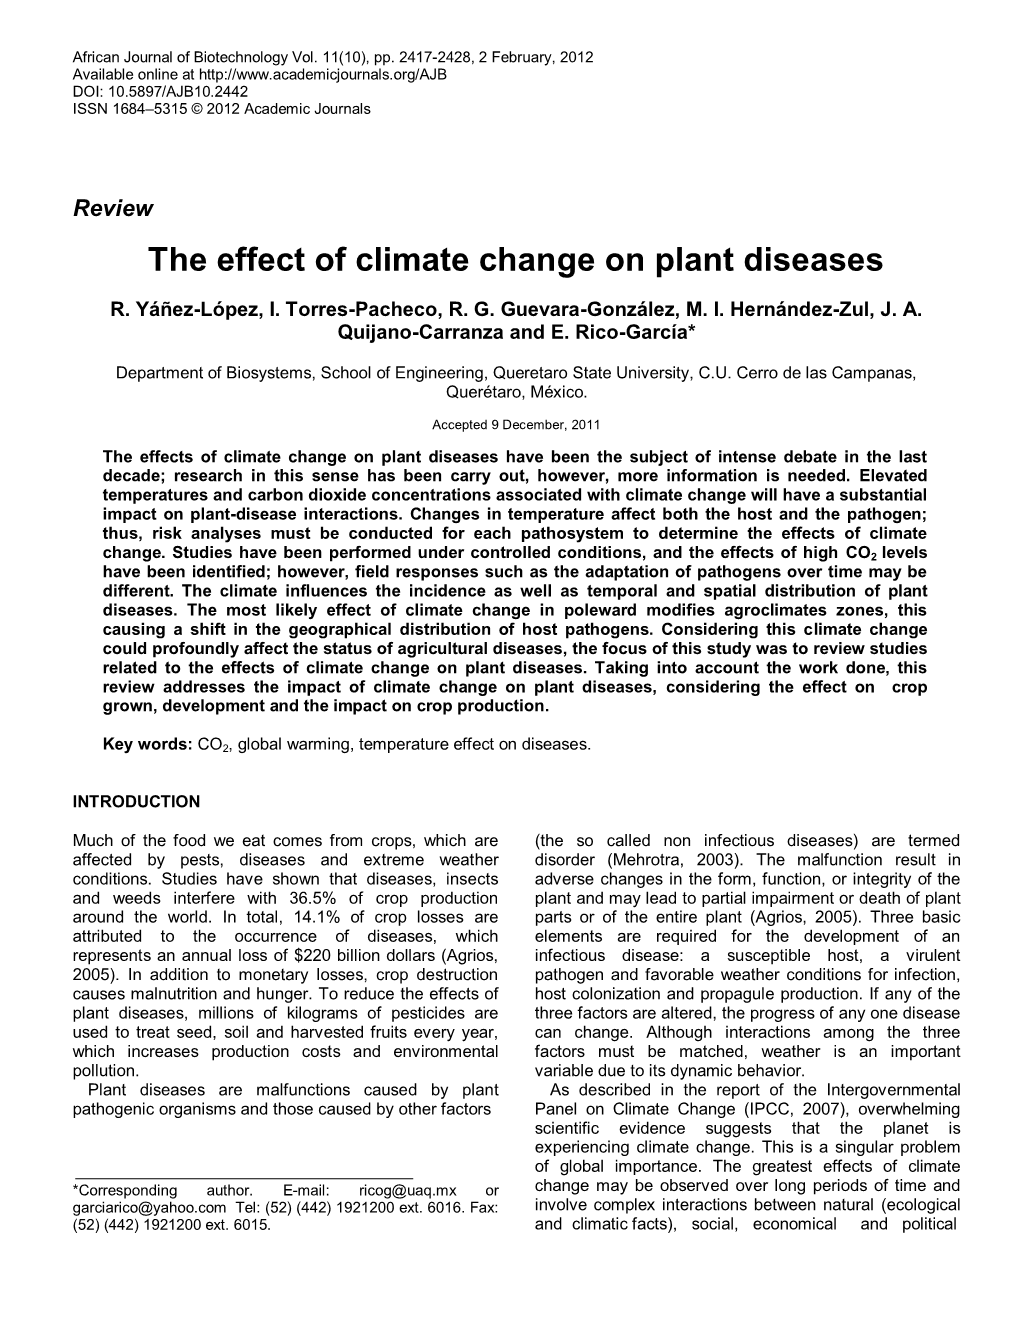 The Effect of Climate Change on Plant Diseases